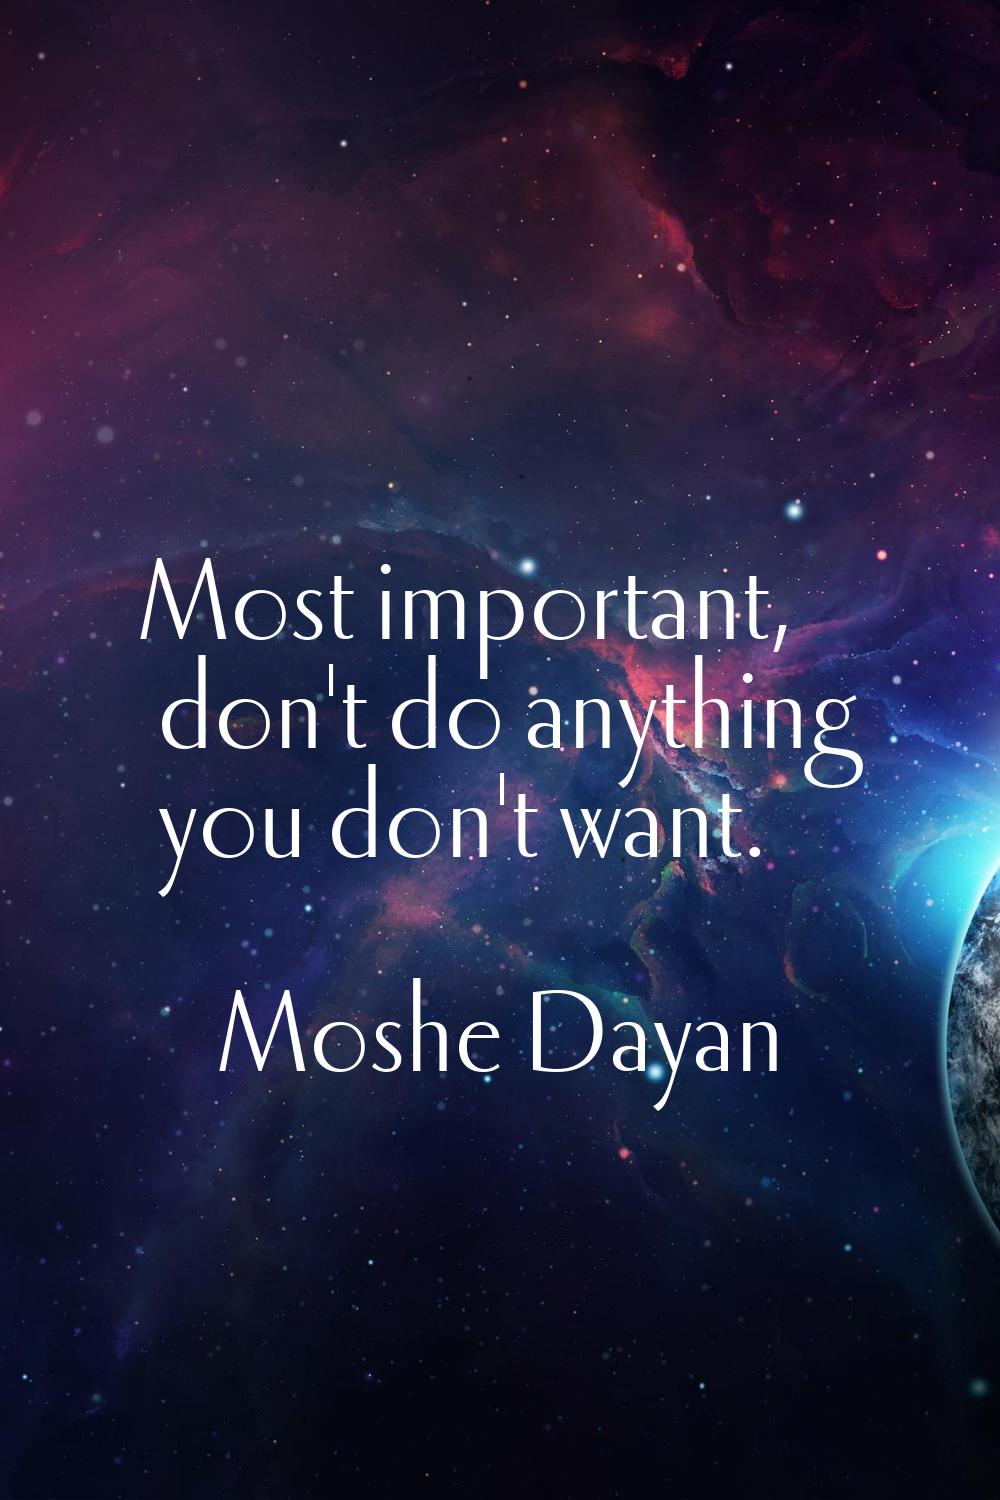 Most important, don't do anything you don't want.